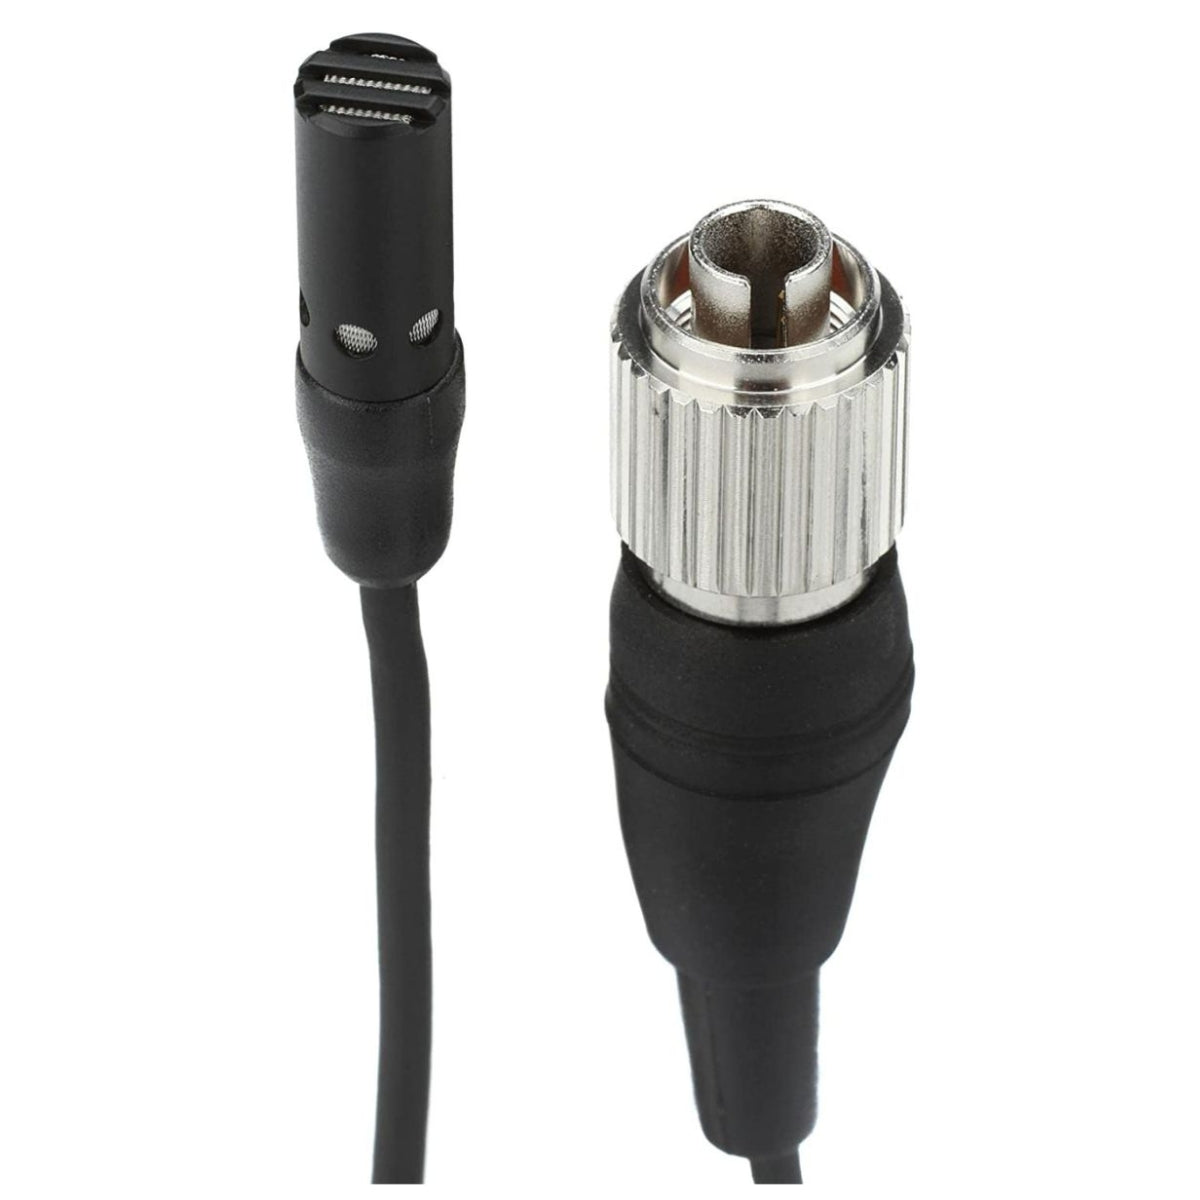 Audio Technica Subminiature-Cardioid Condenser Lavalier 4-pin cH connector AT898cH